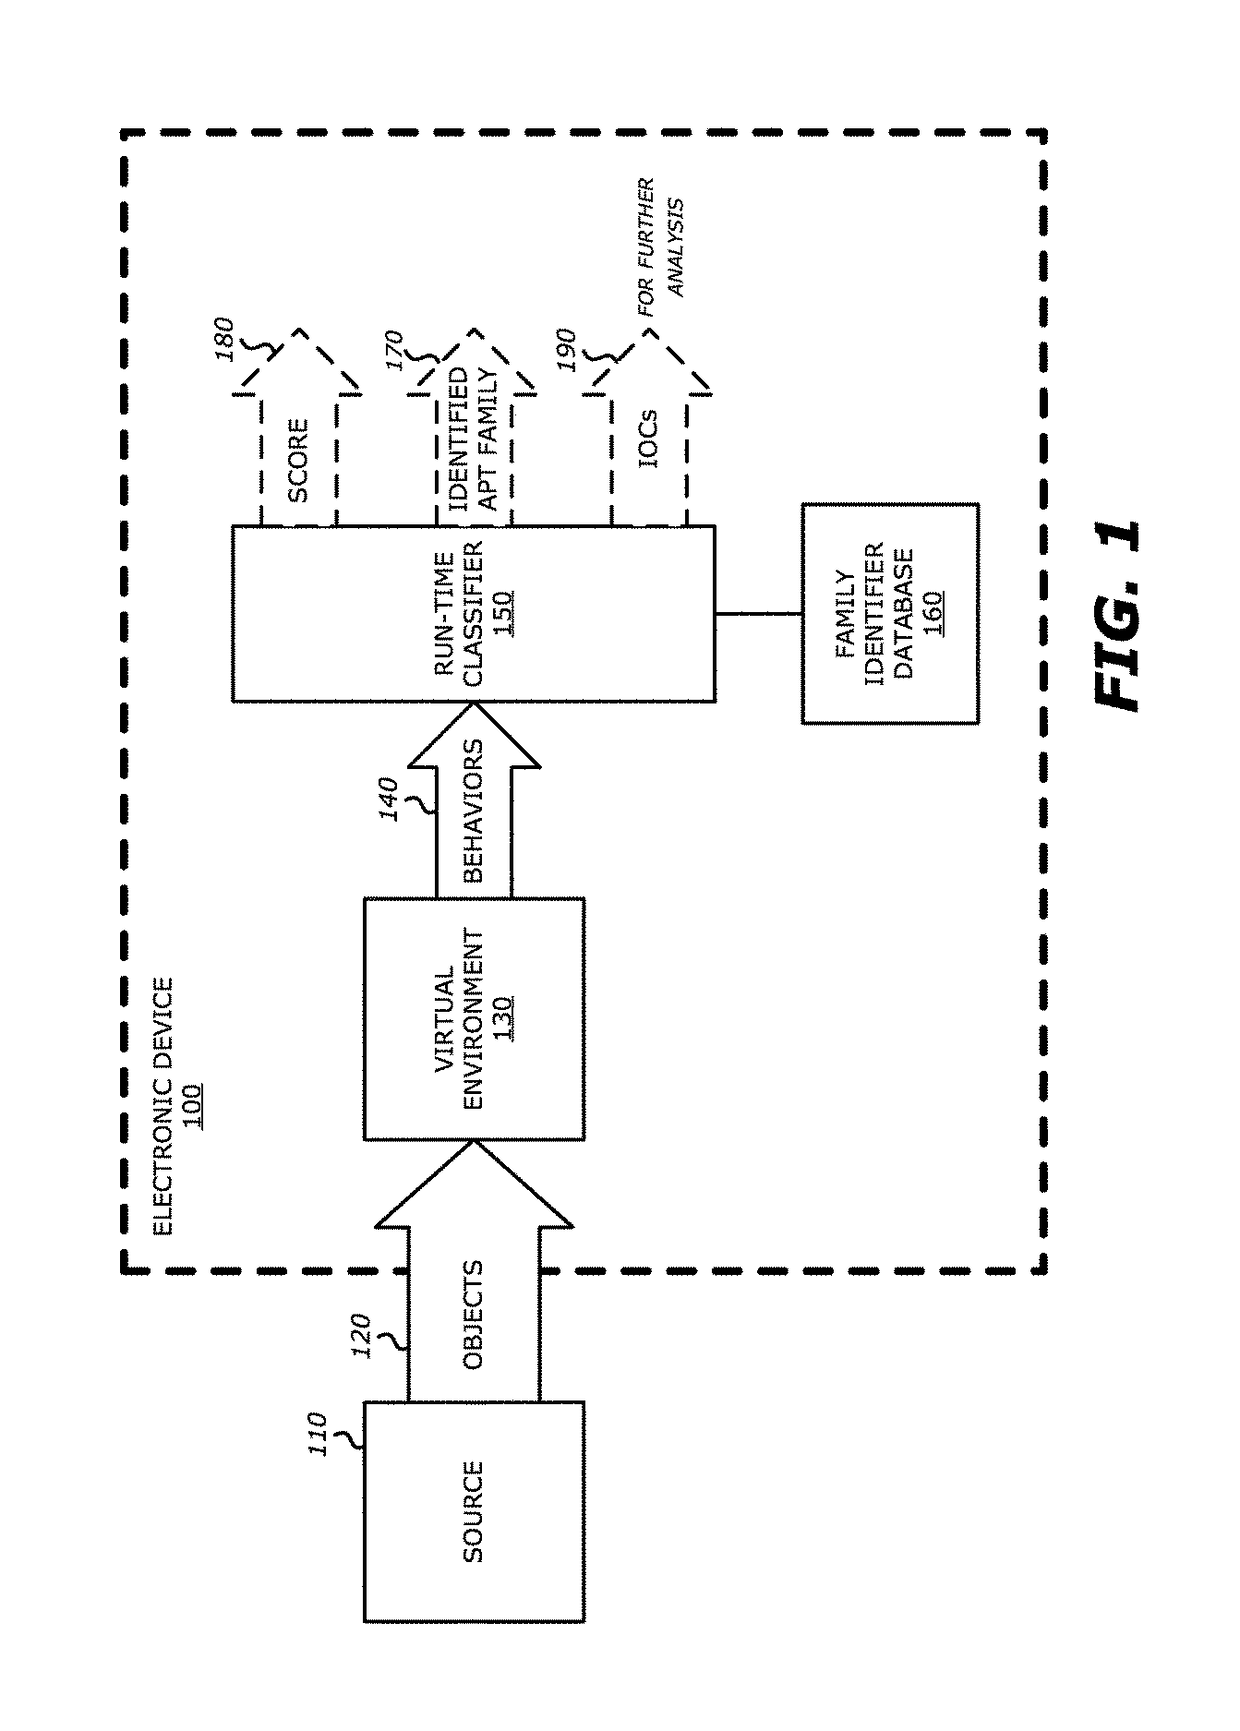 System and method for run-time object classification